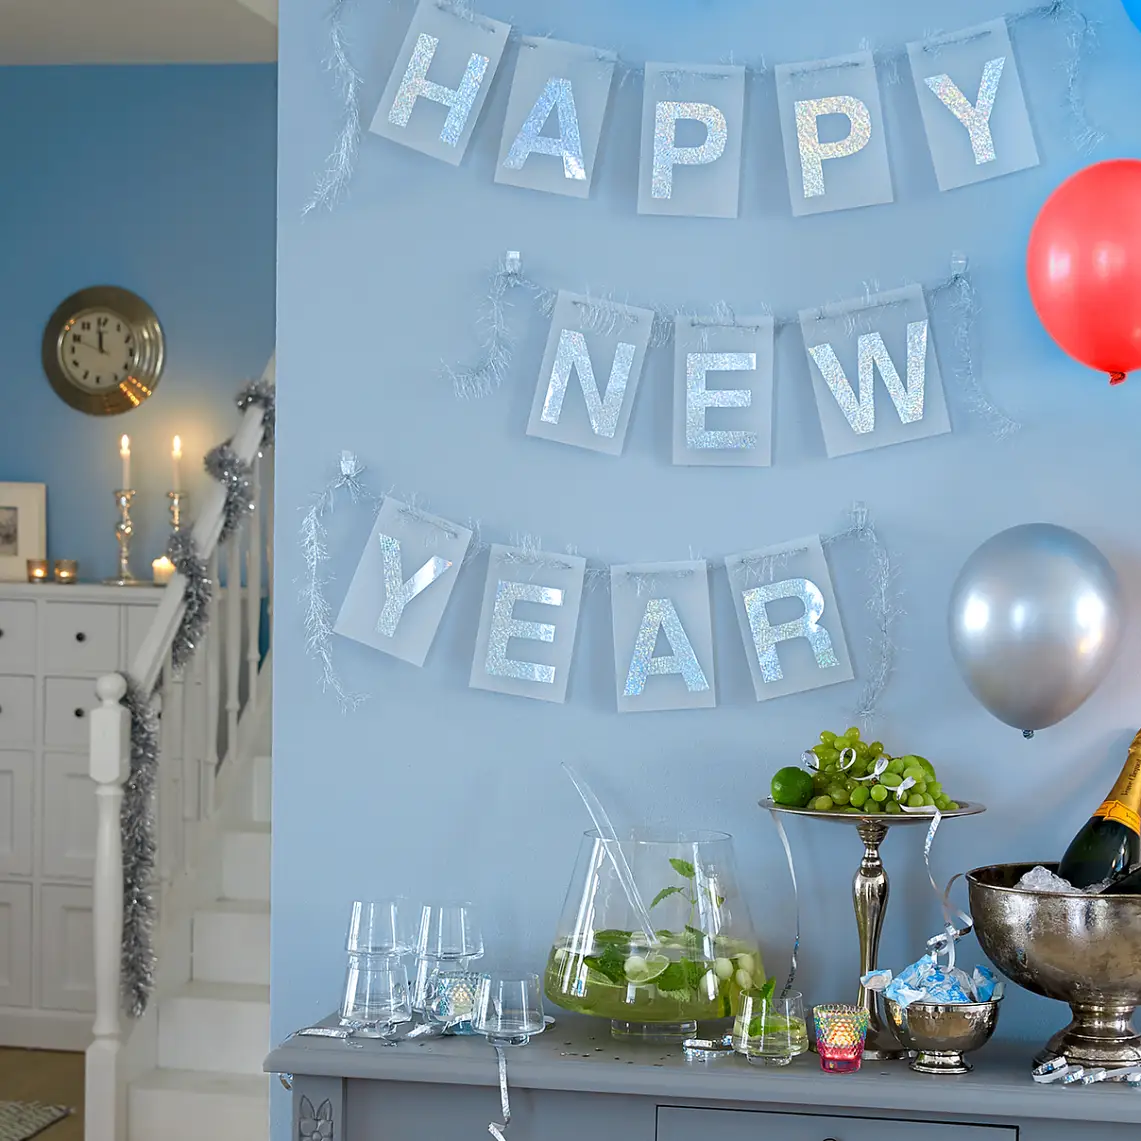 Make a wish – for a happy new year! The festooabove the bar shimmers in all colors thanks to holographic film. Just like the balloons, it is attached with tesa Powerstrips® and can be removed without a trace.